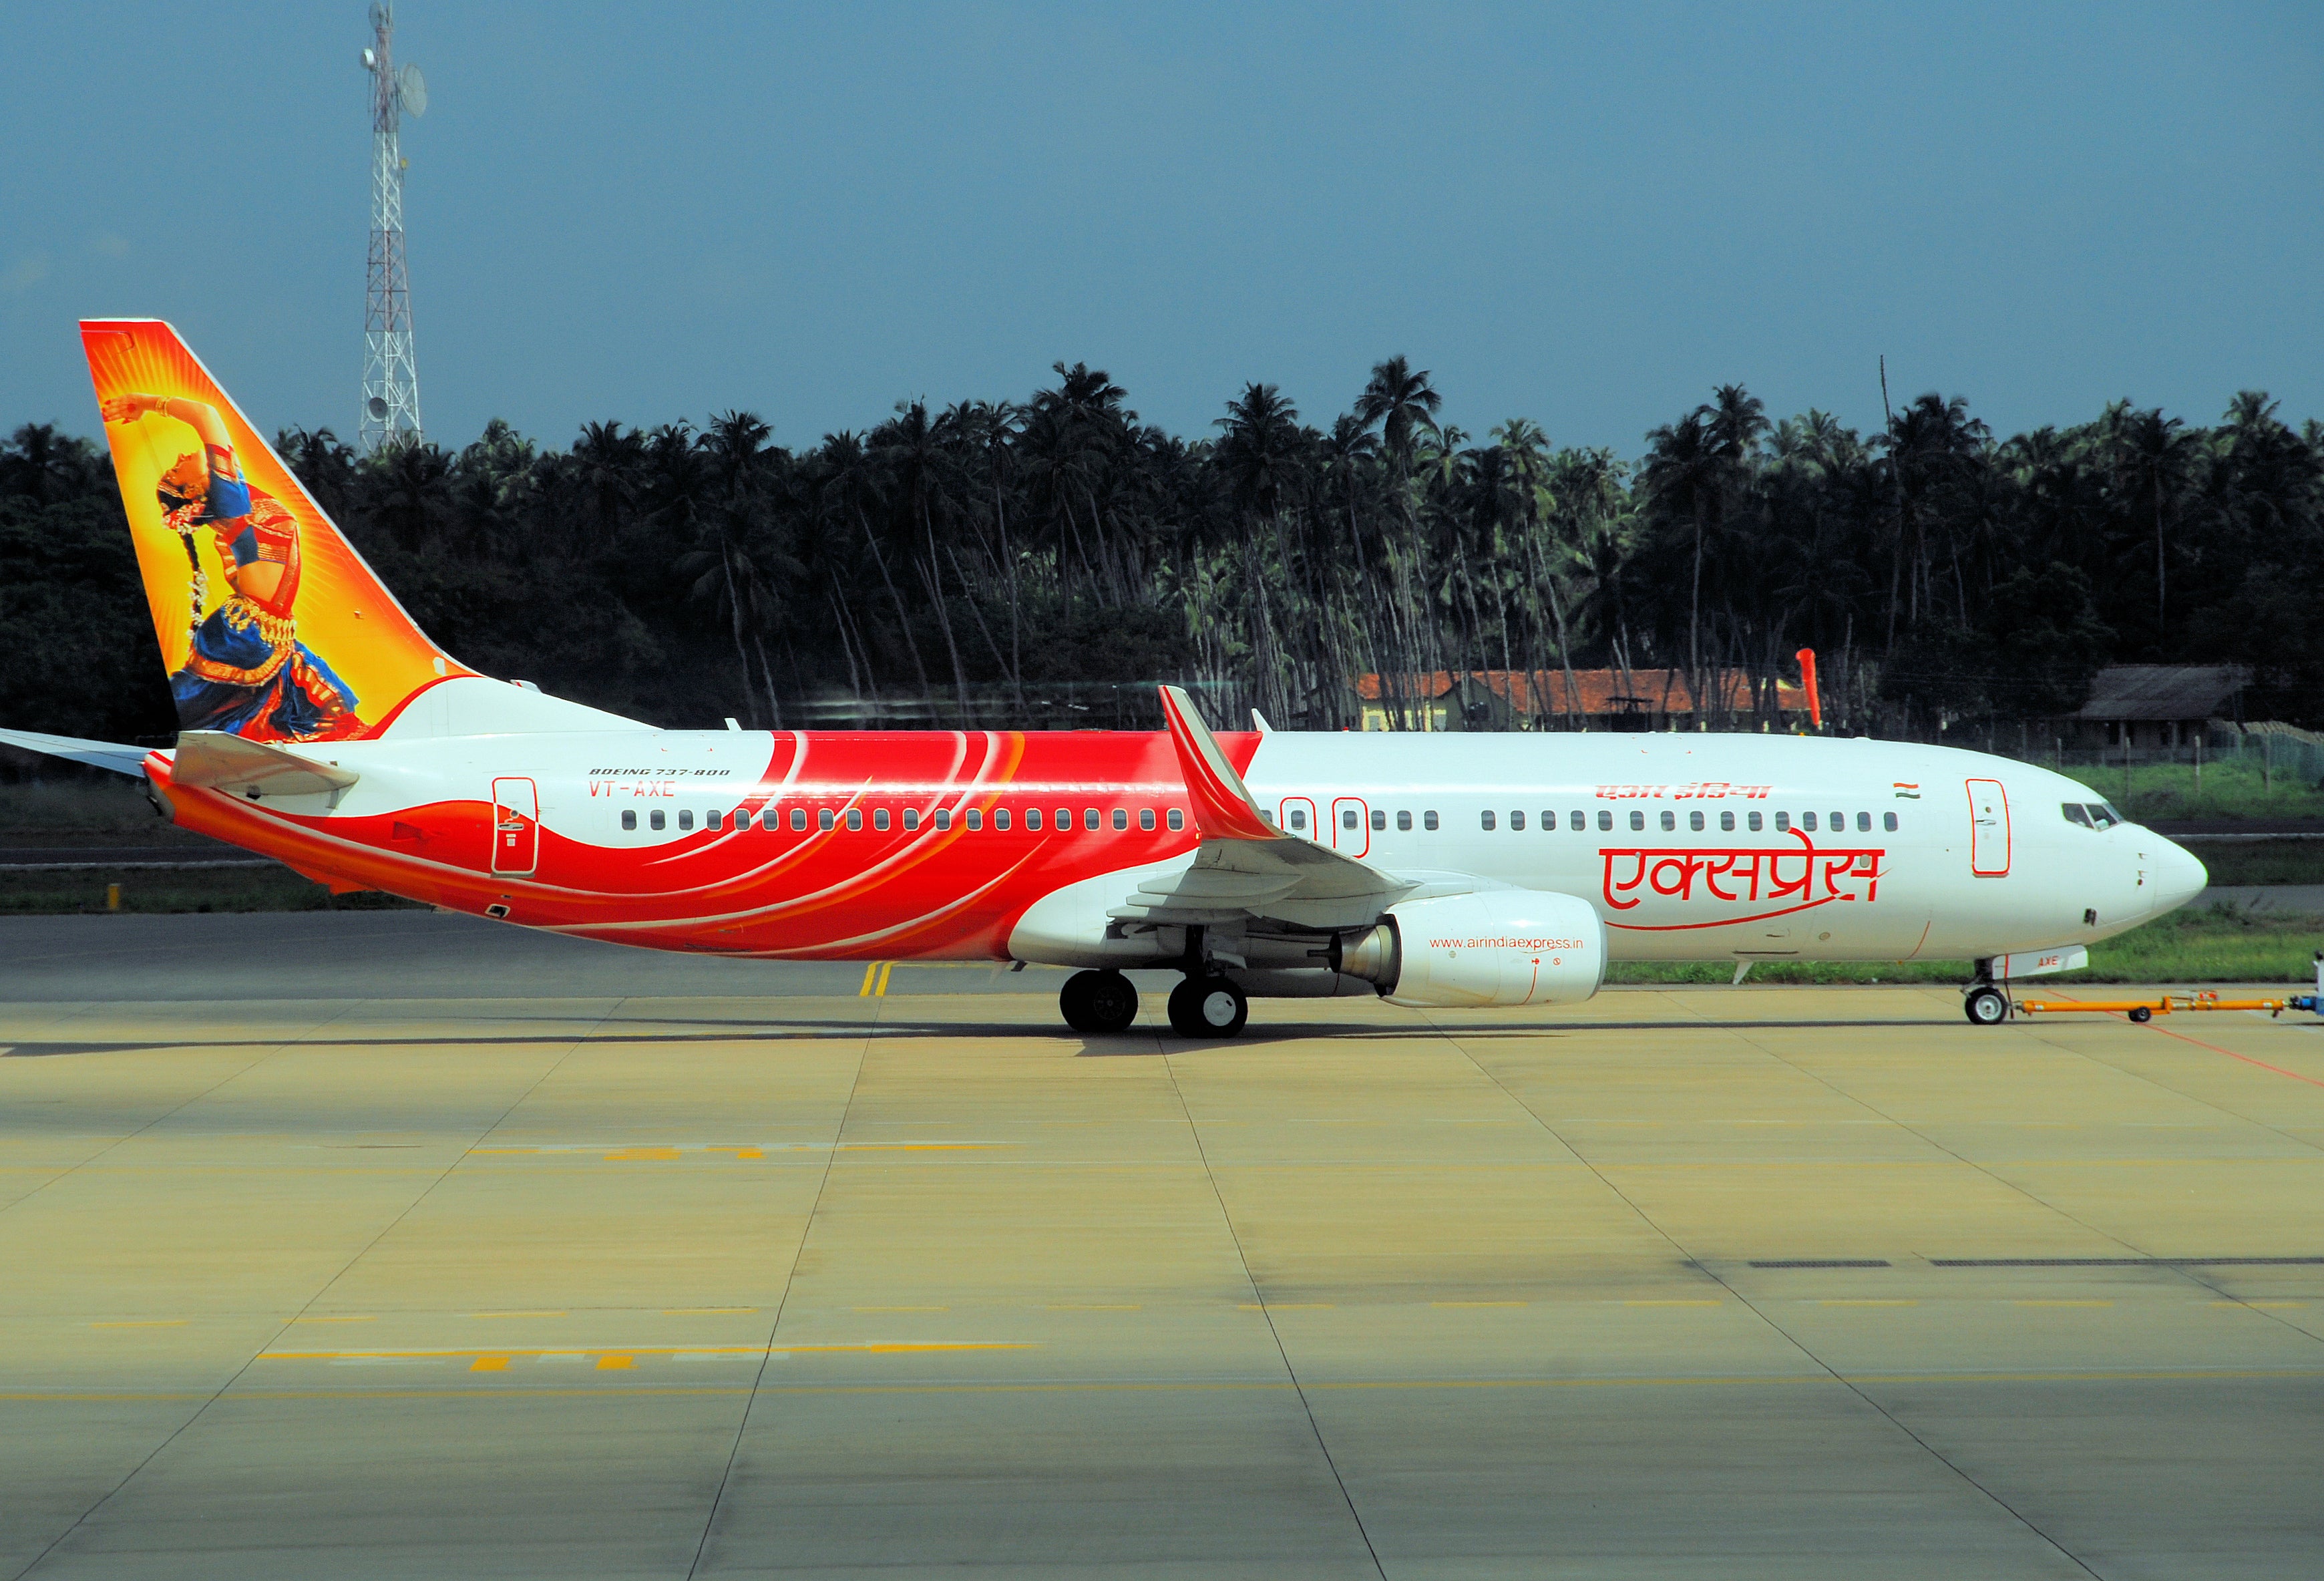 184 passengers were onboard the Air India Express aircraft